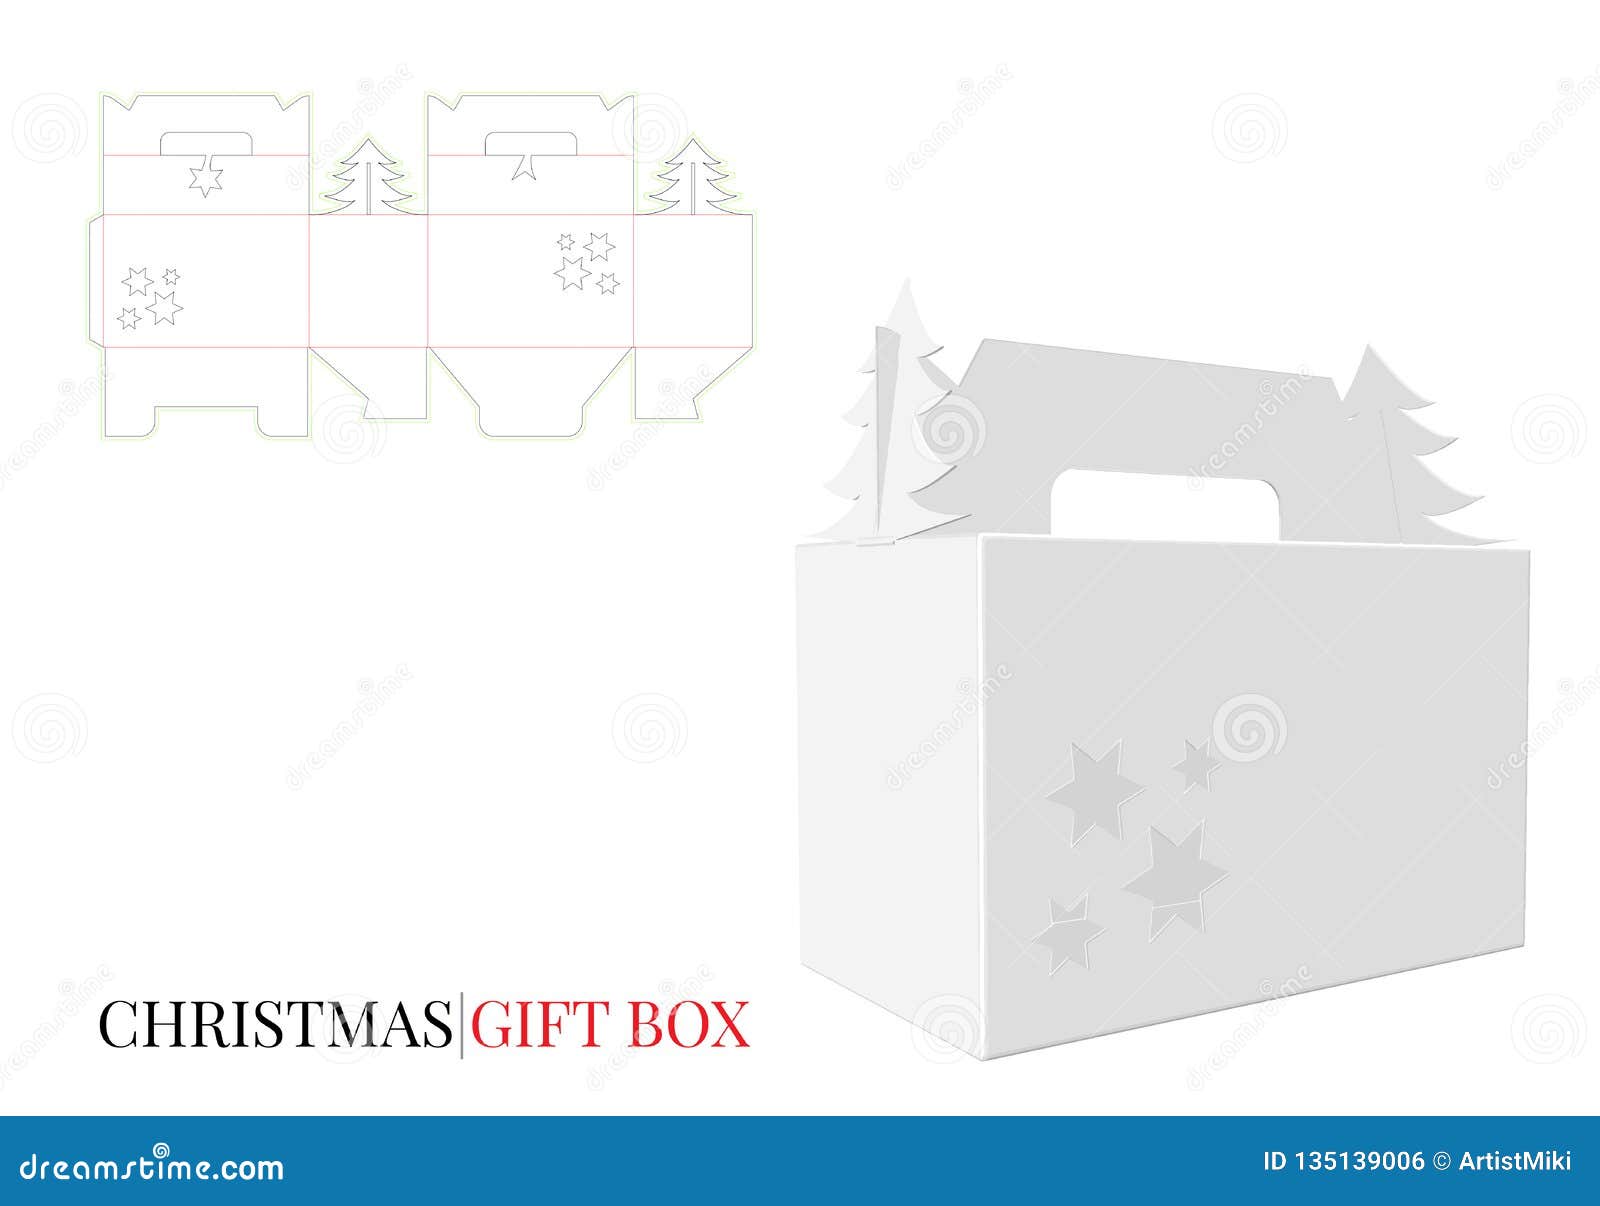 template with die cut lines. christmas gift box with handle.  with die cut / laser cut layers